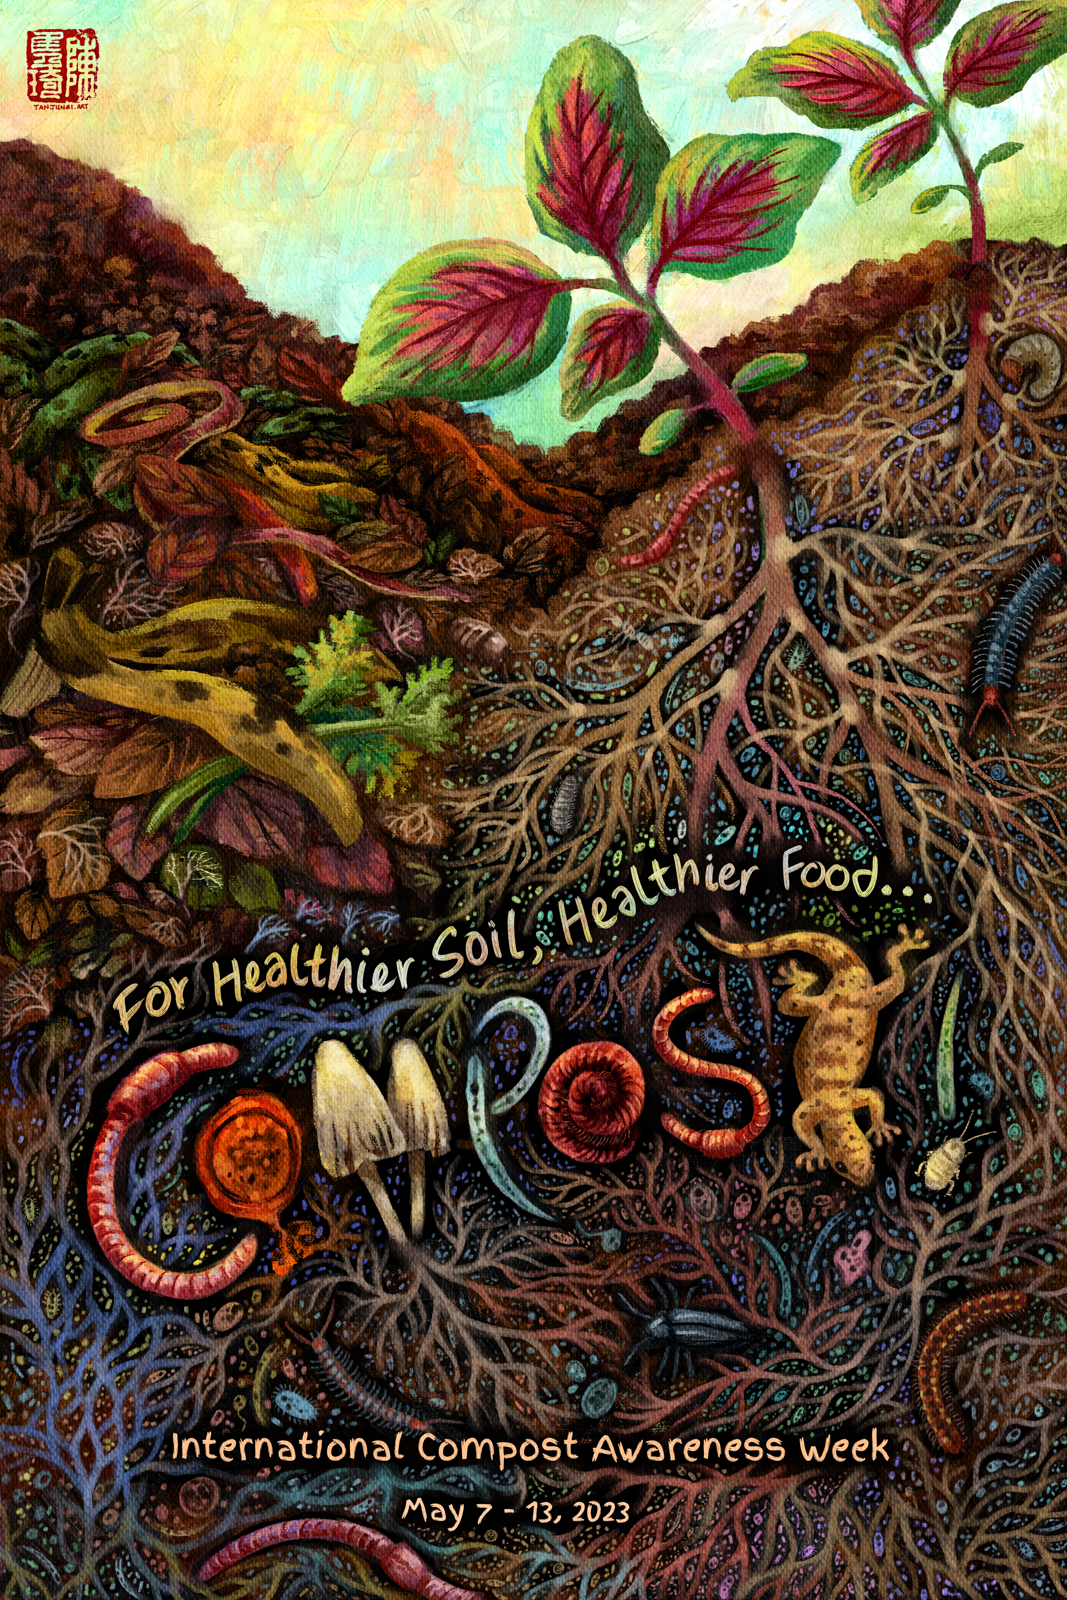 Digital painting of a poster for the International Compost Awareness Week 2023 poster design contest. It shows young red bayam plants growing above ground, next to a heap of foodwaste and brown matter in the process of being composted. Beneath the plants and compost heap, taking up most of the poster, is an underground view showcasing the root systems and mycorhizzal networks in the soil teeming with biology and life. The title reads 'For Healthier Soil, Healthier Food...Compost!' The word 'Compost!' in the title is formed using various soil creatures, like earthworms, nematodes, mushrooms and lizards.